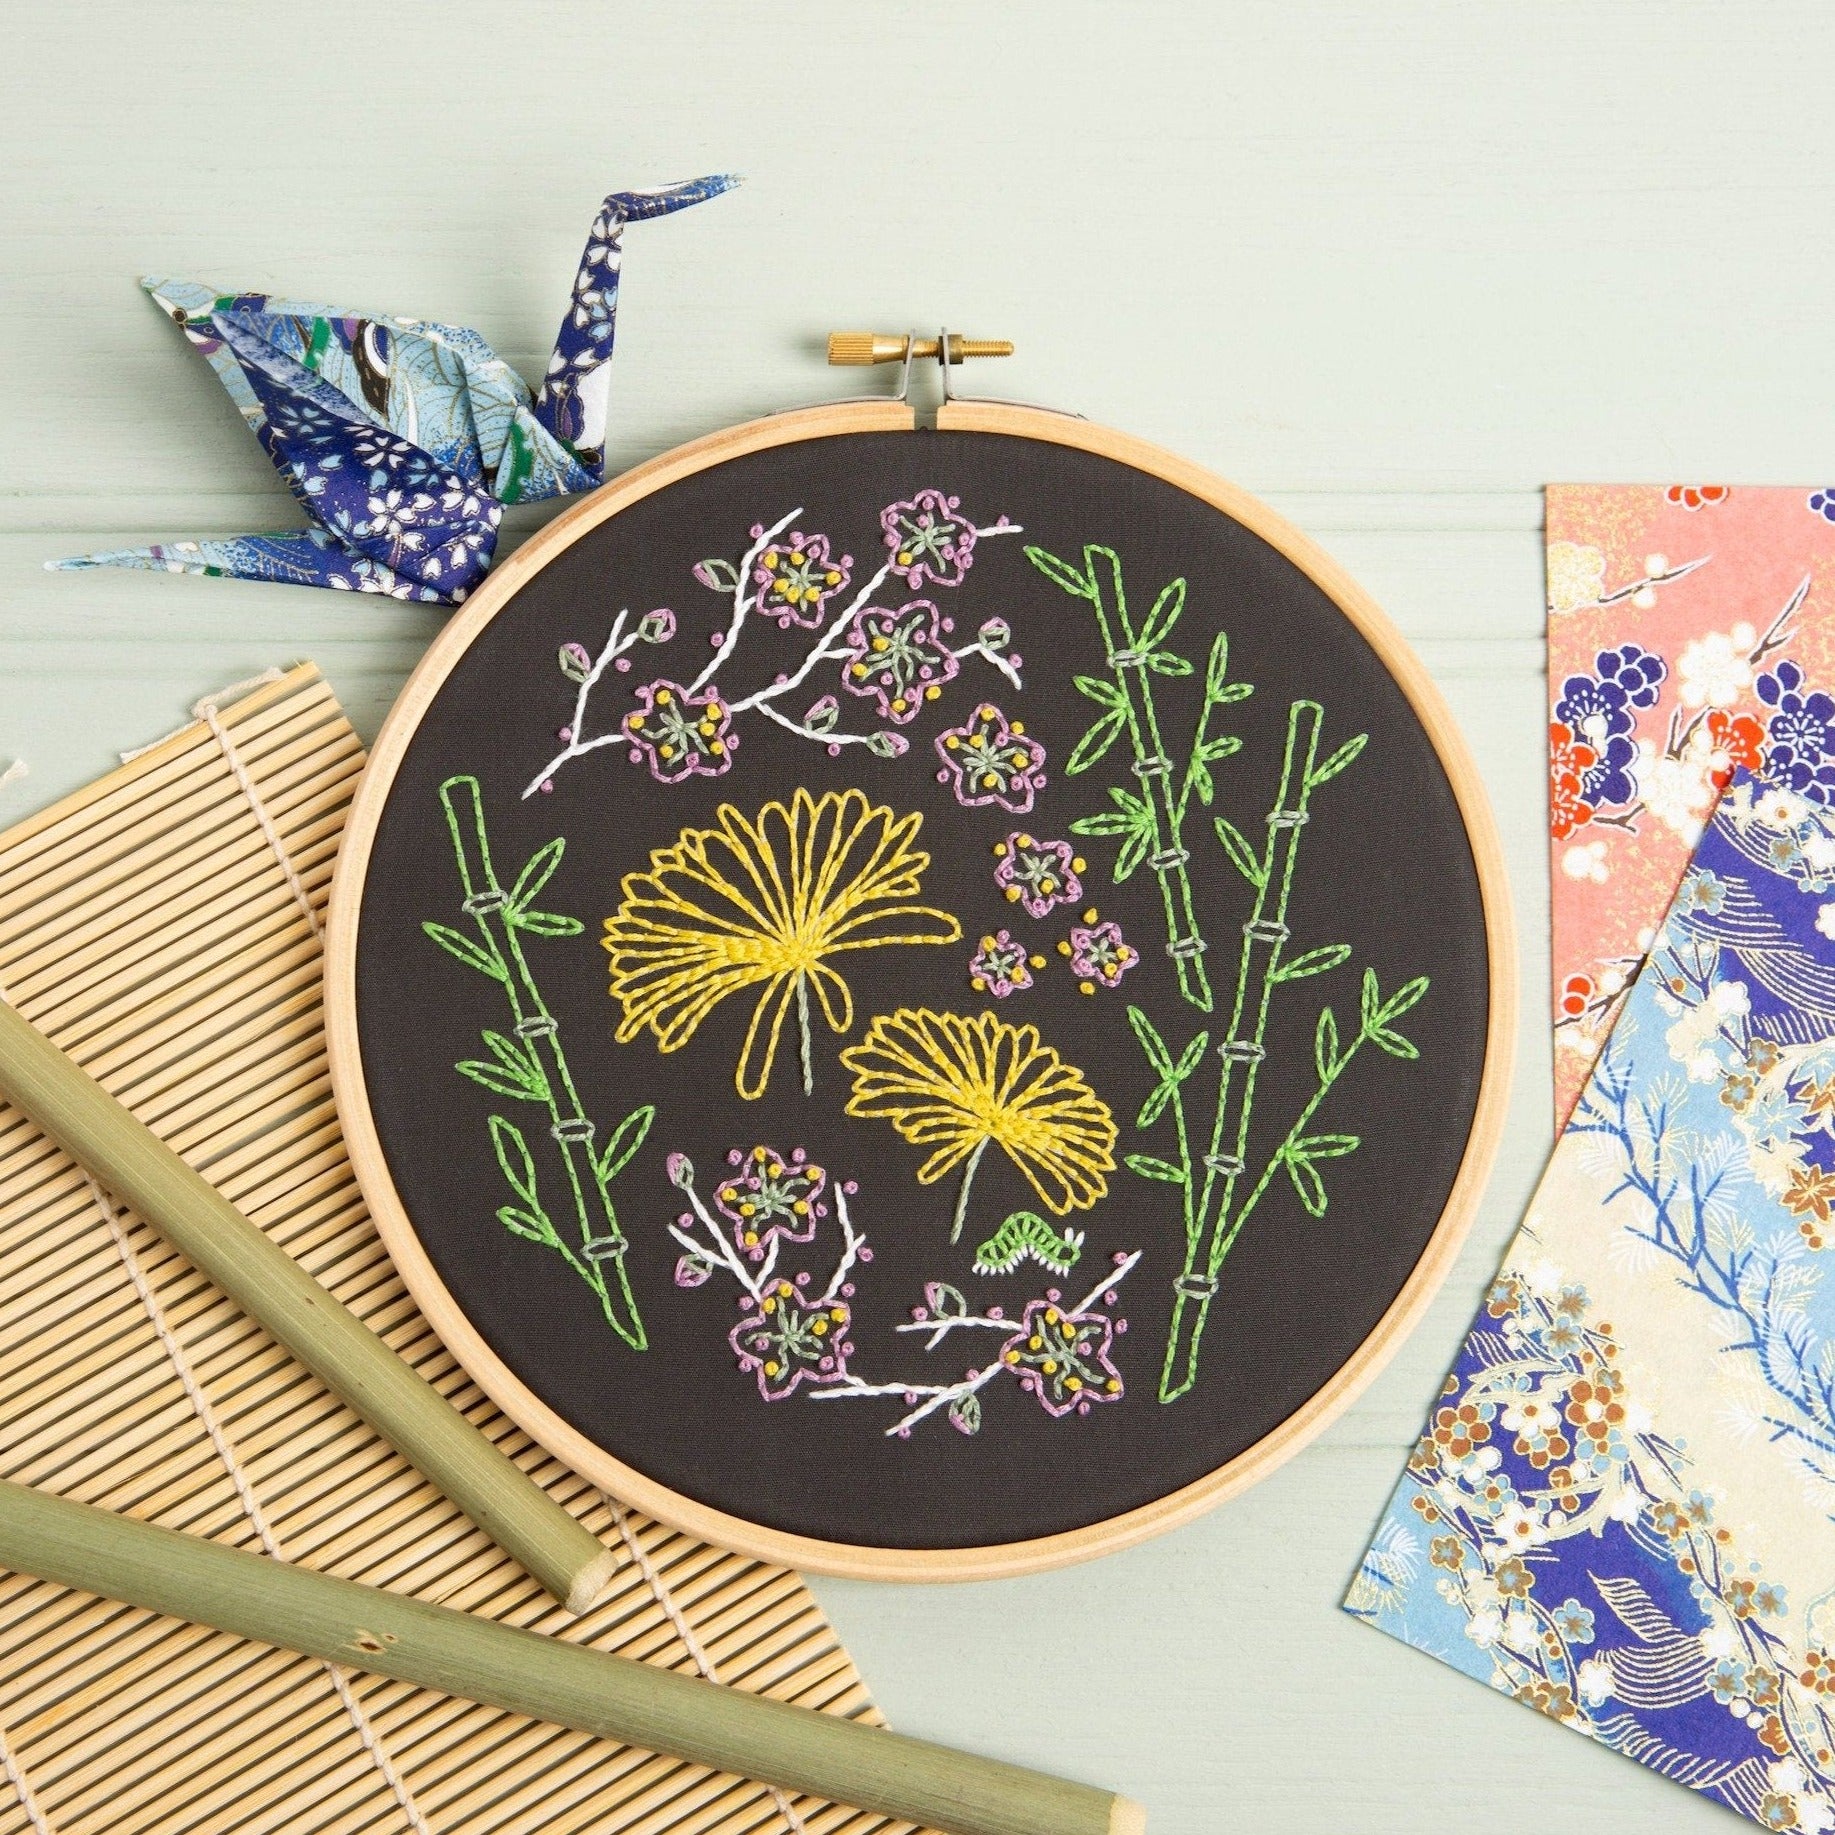 Japanese Embroidery Online Shop for Equipment and Materials - Flat